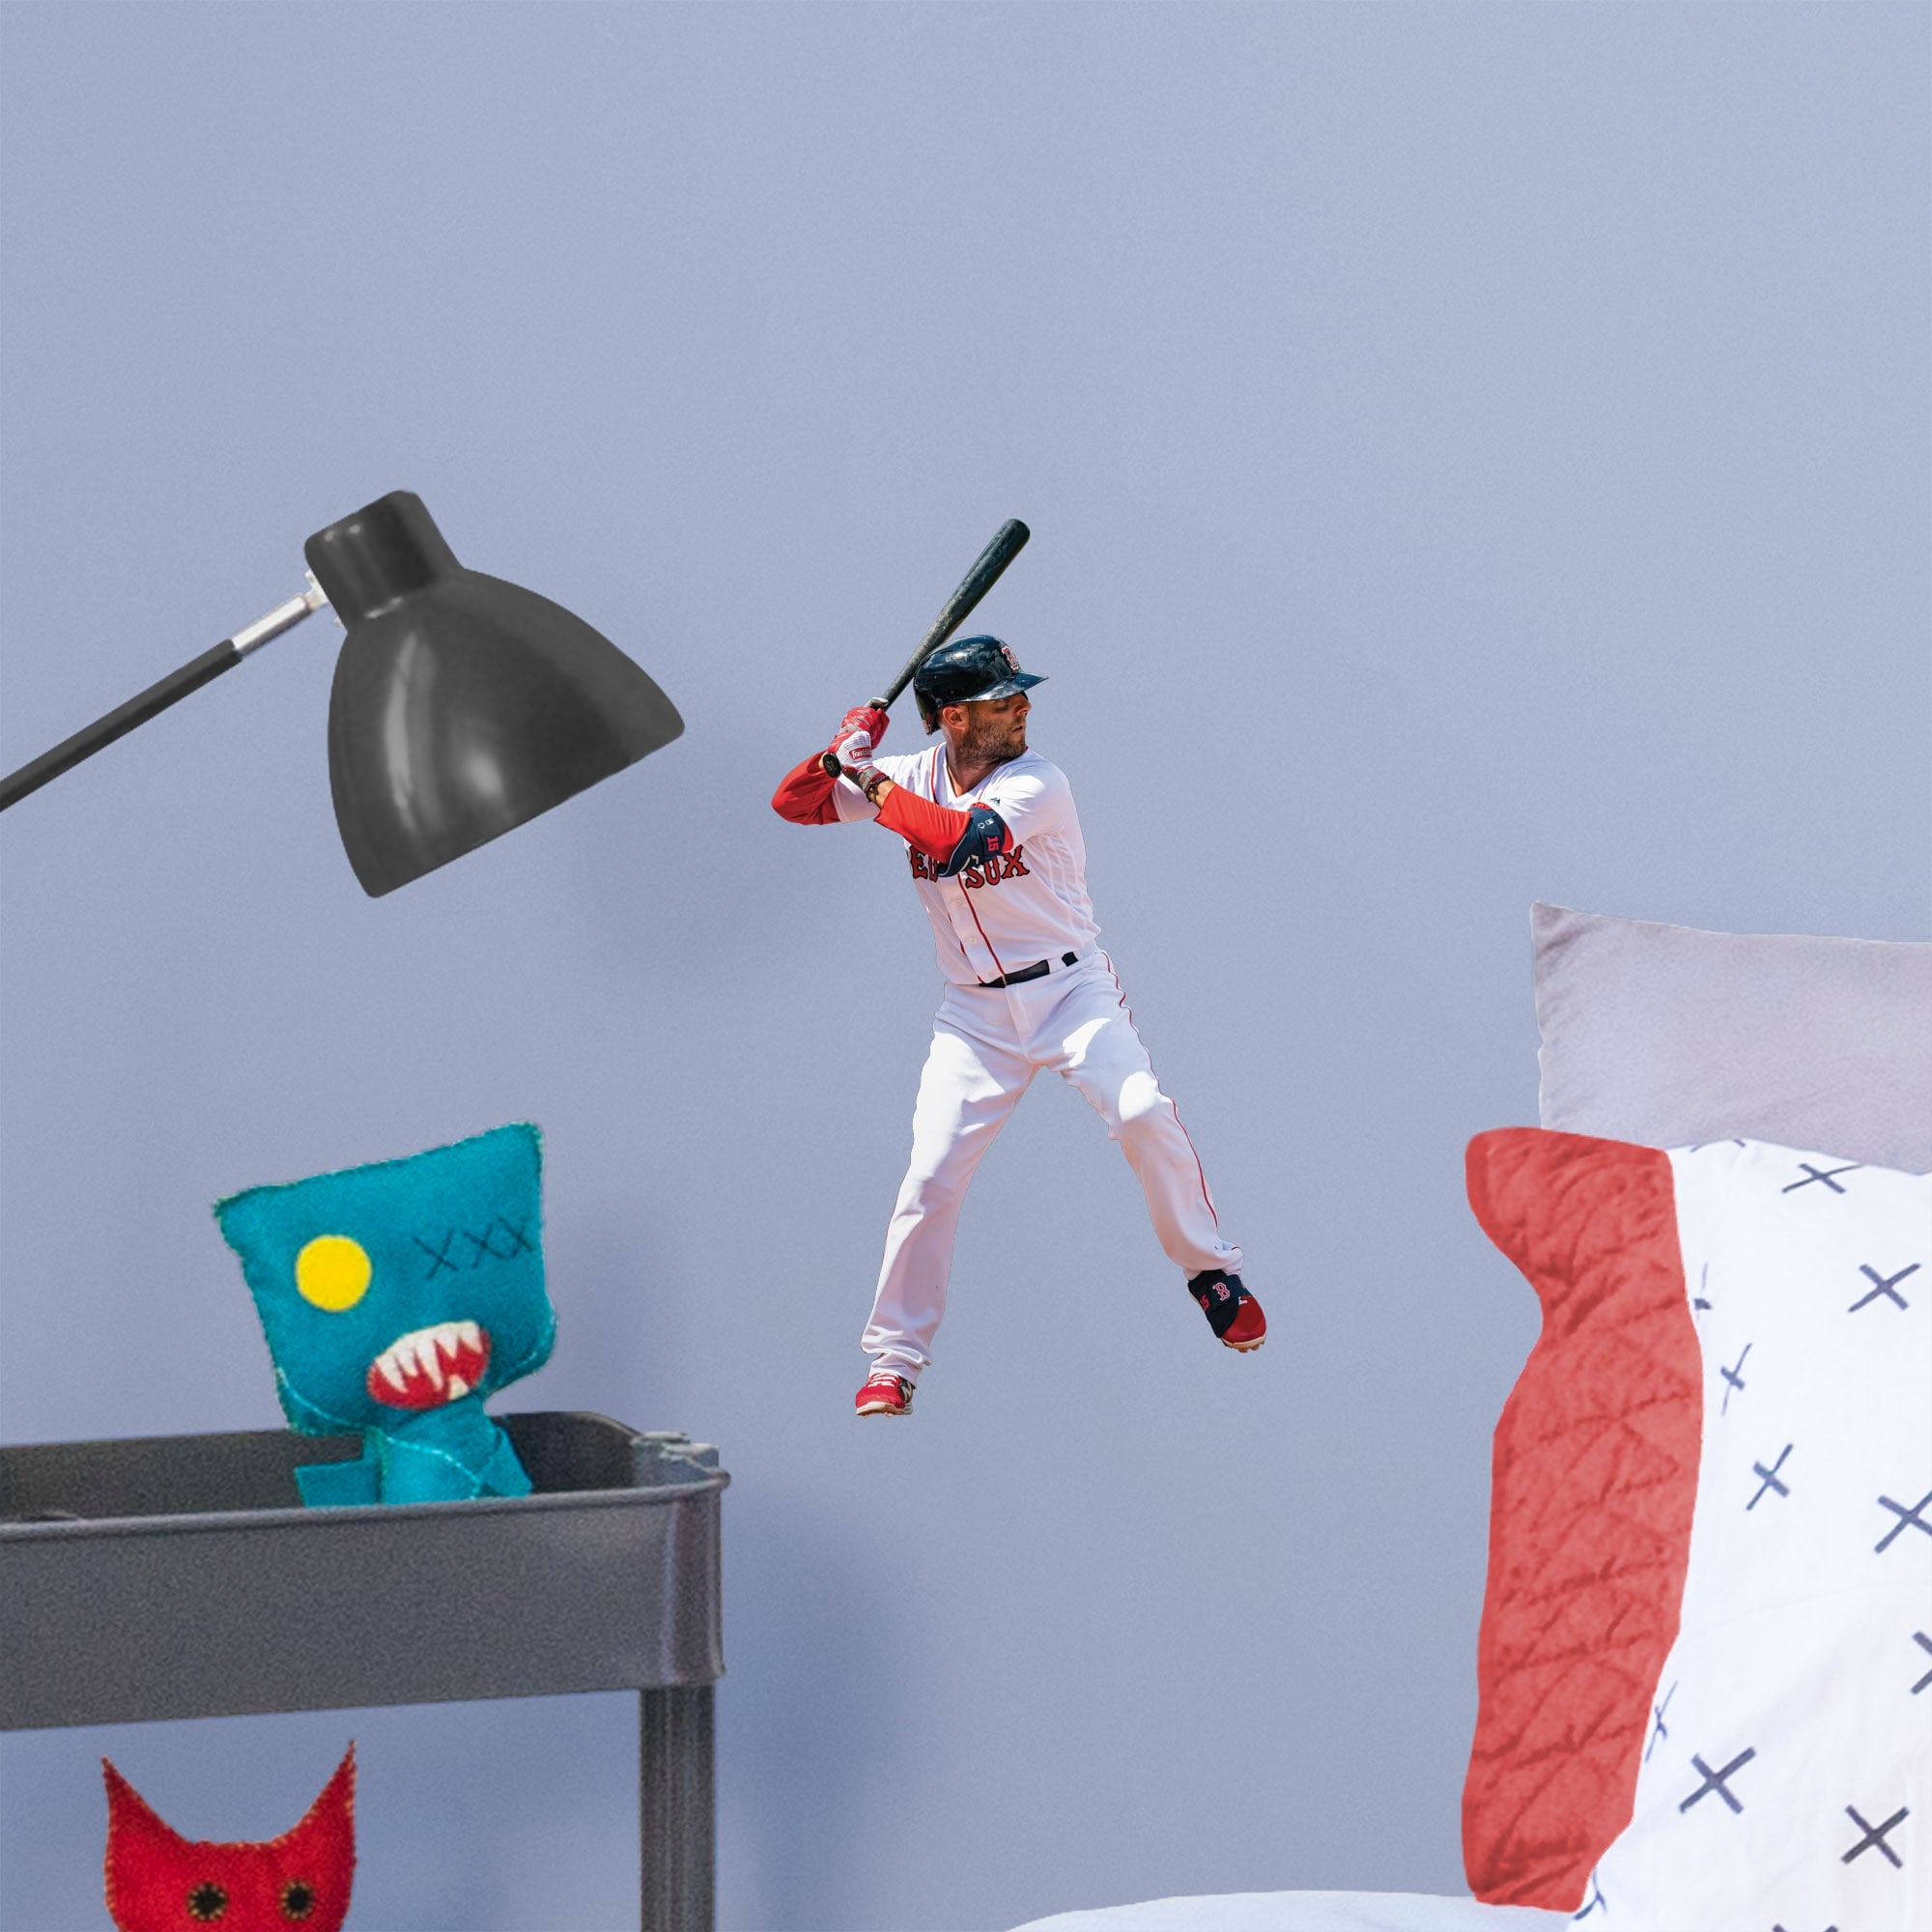 Dustin Pedroia for Boston Red Sox - Officially Licensed MLB Removable Wall Decal Large by Fathead | Vinyl